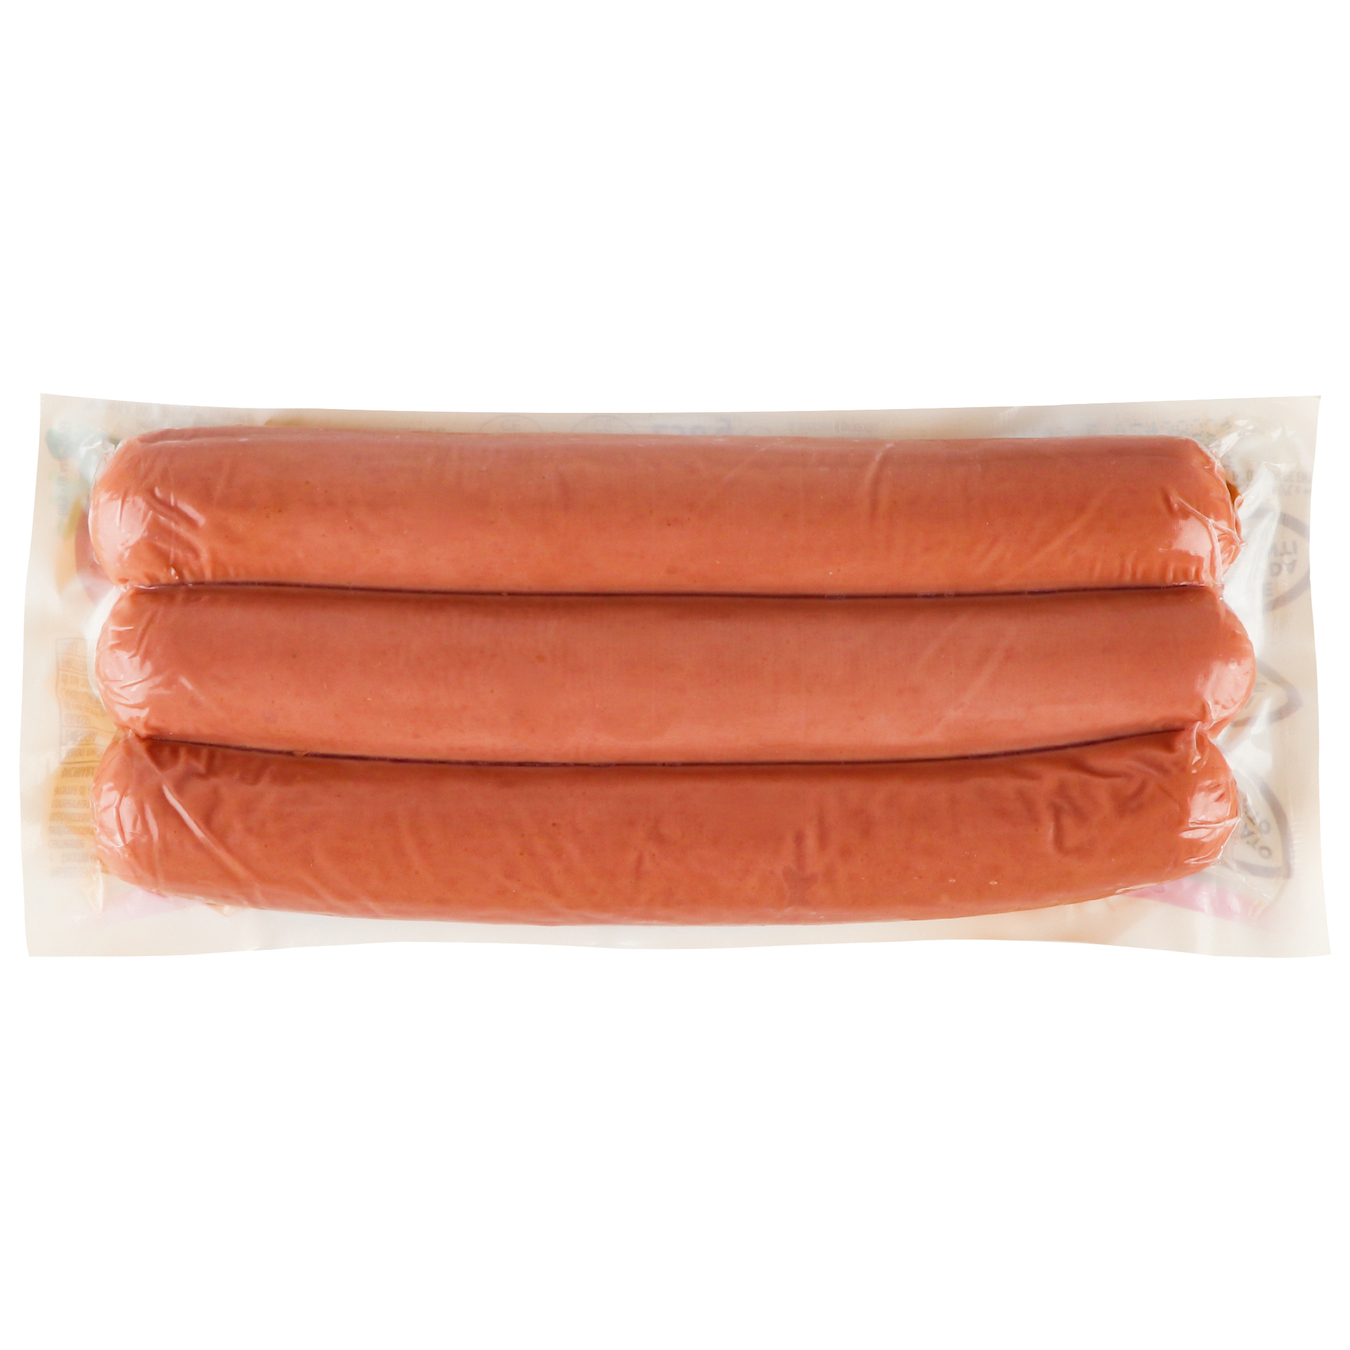 AIA Wudy Classico Sausages 250g 3